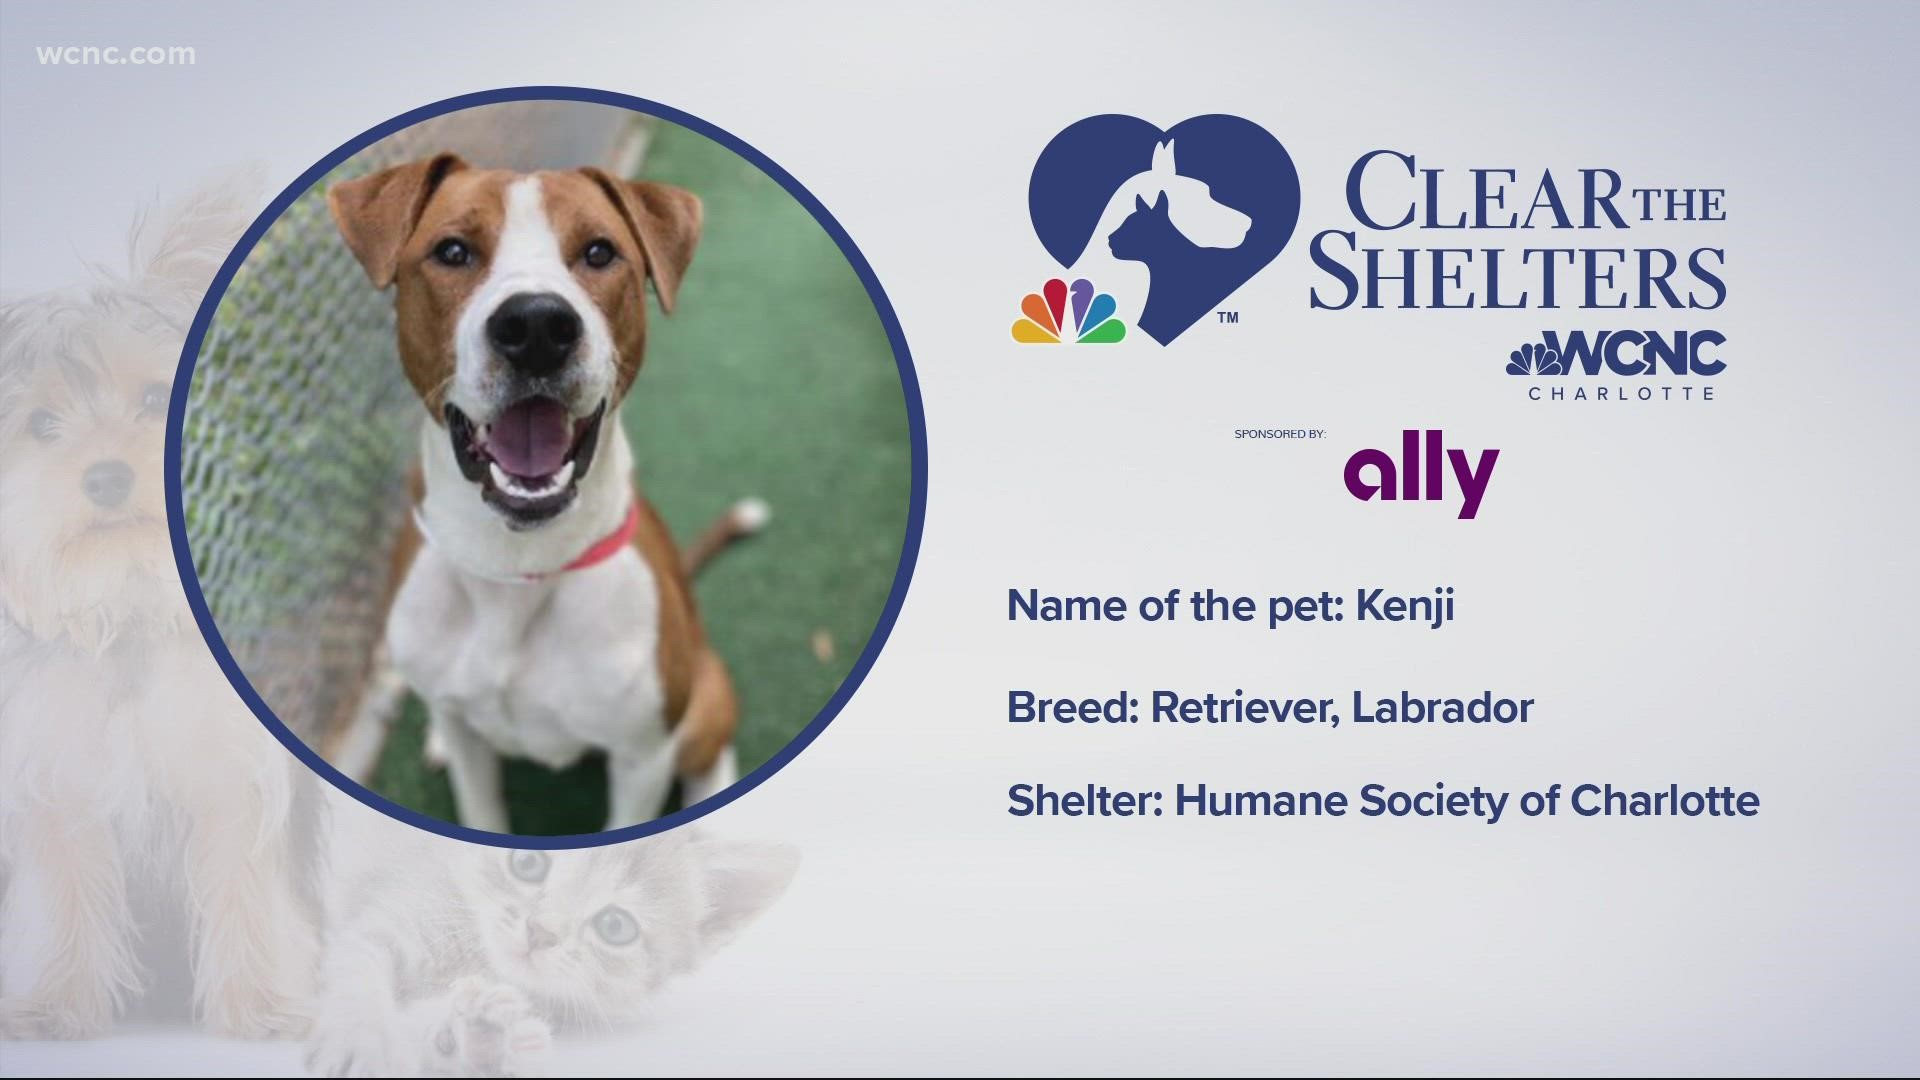 Kenji is a Labrador and Retriever mix at the Humane Society of Charlotte.